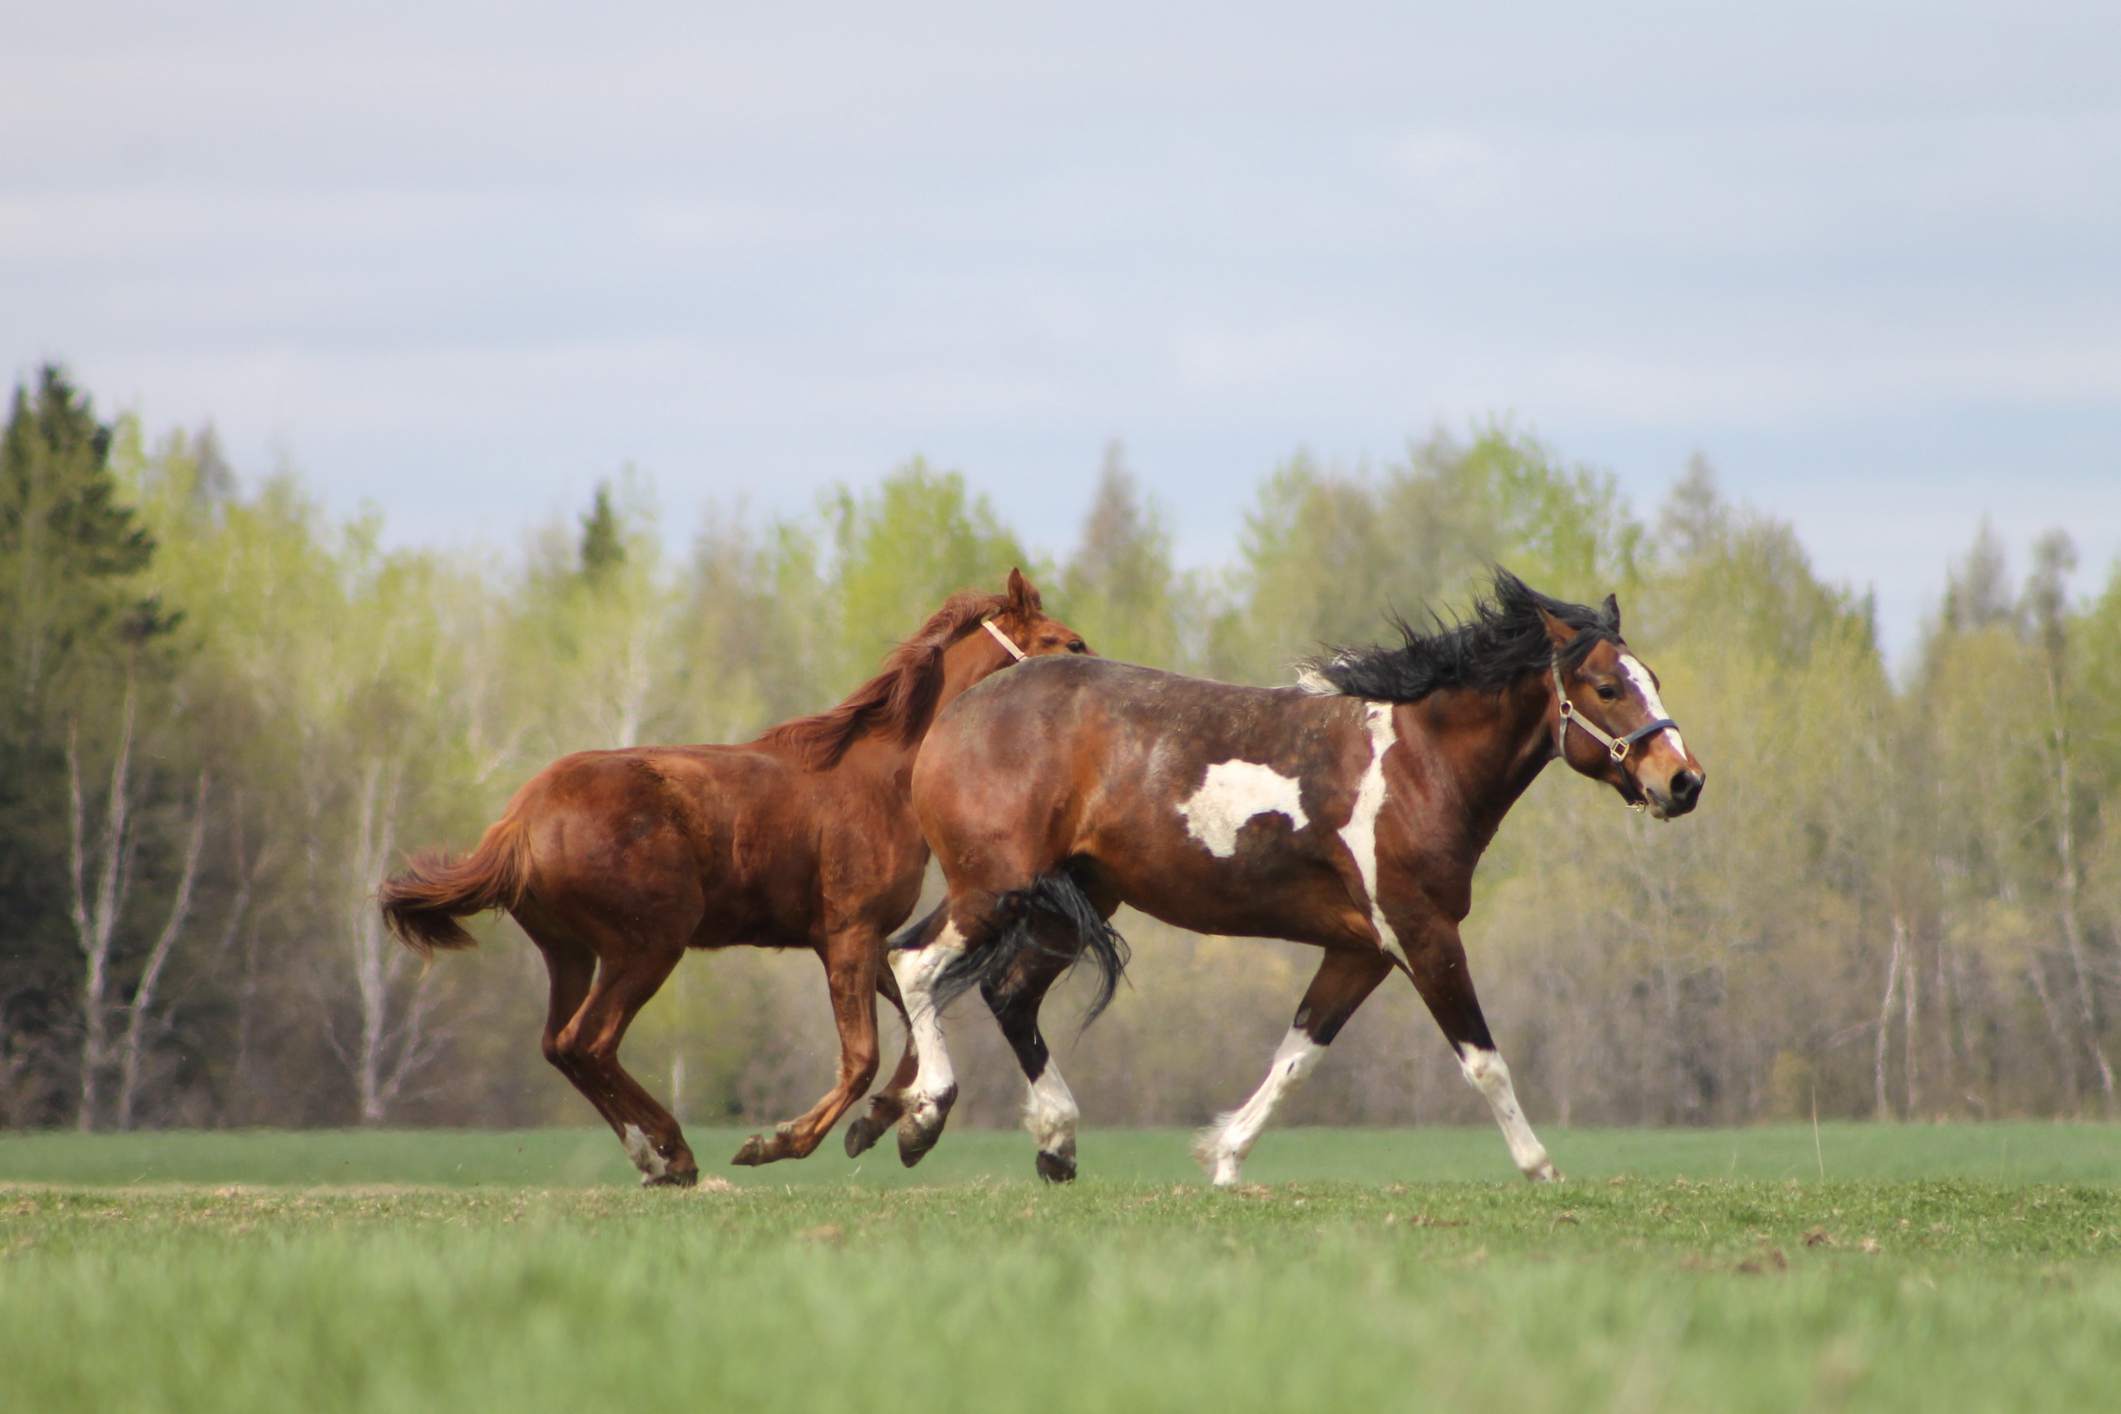 Horses running together in a field